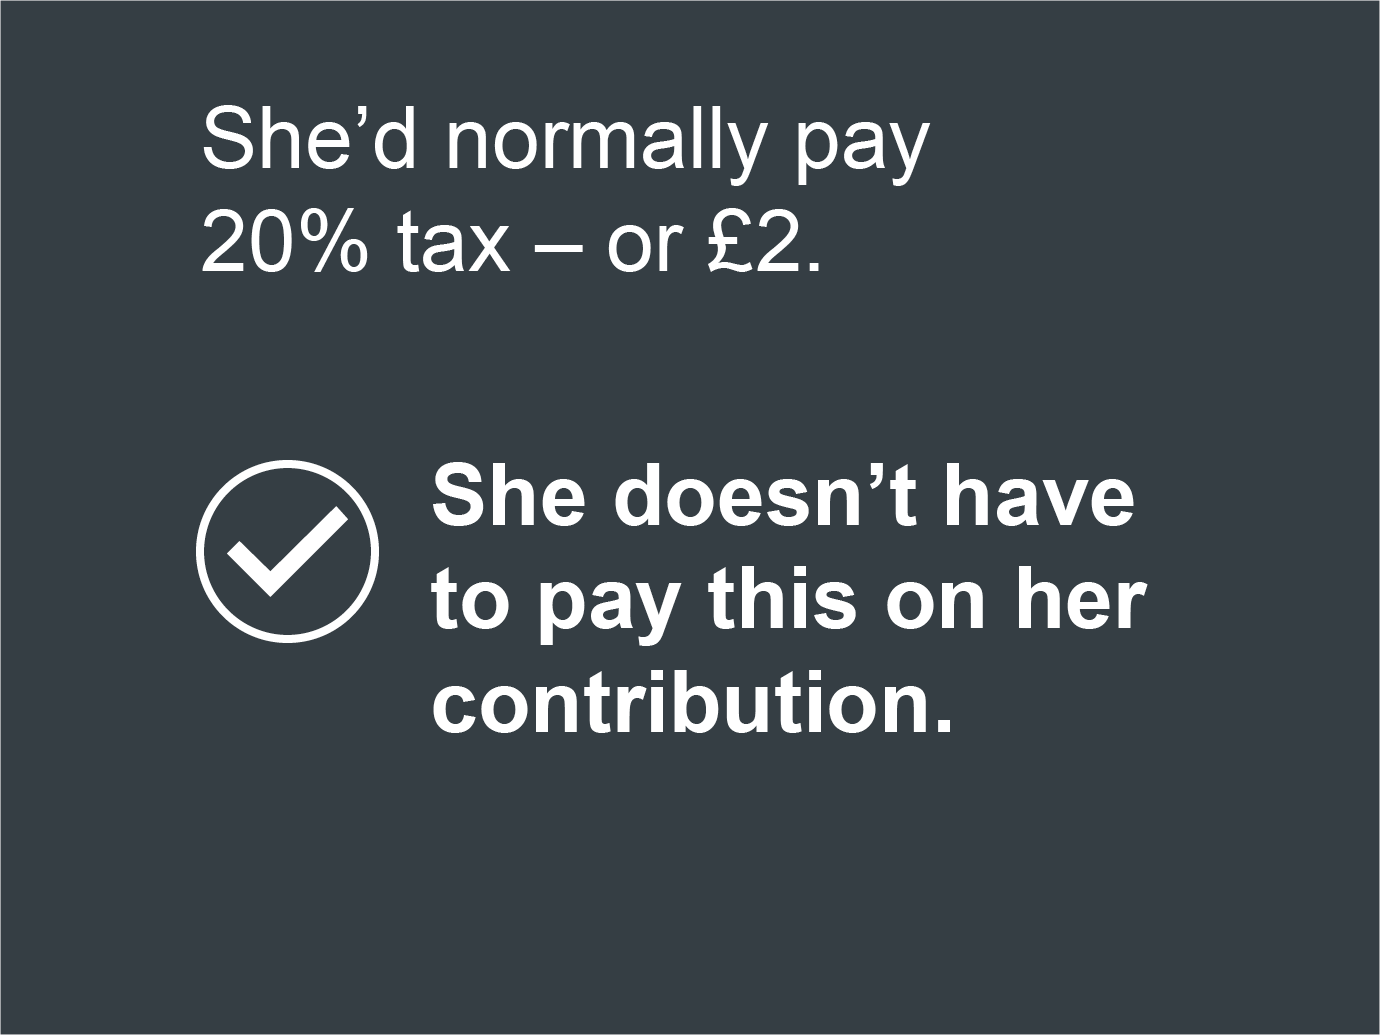 She'd normally pay 20% tax - or £2. She doesn't have to pay this on her contribution.